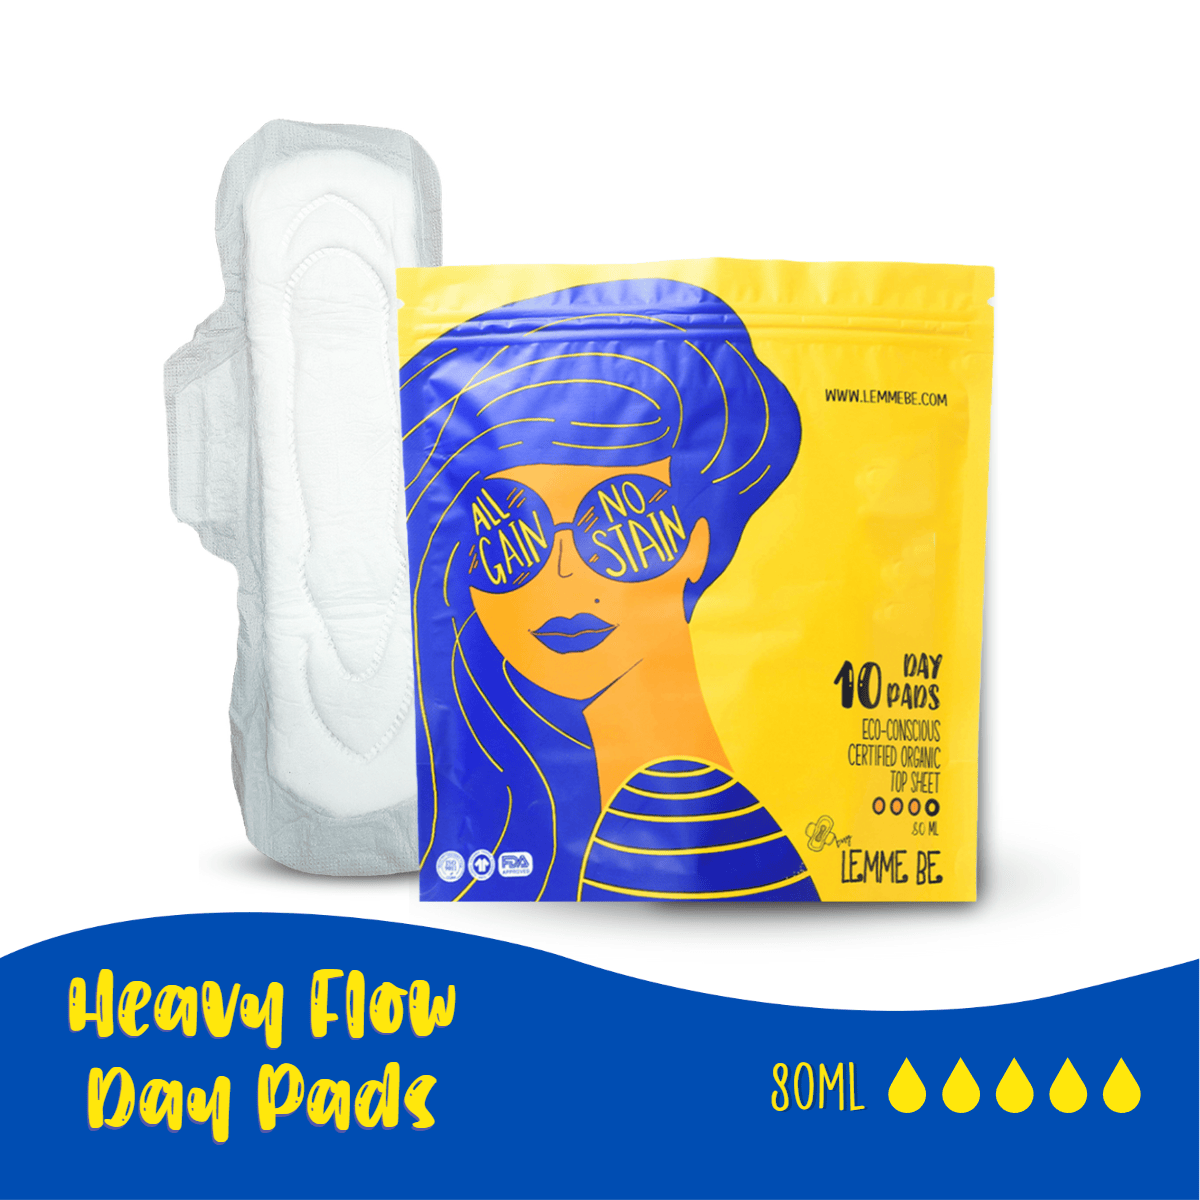 Lemme Be 100% Organic Cotton Heavy Flow Day Sanitary Pads I Rash Free Pads Cotton Soft Regular Sanitary Pads For Women - Pack of 10